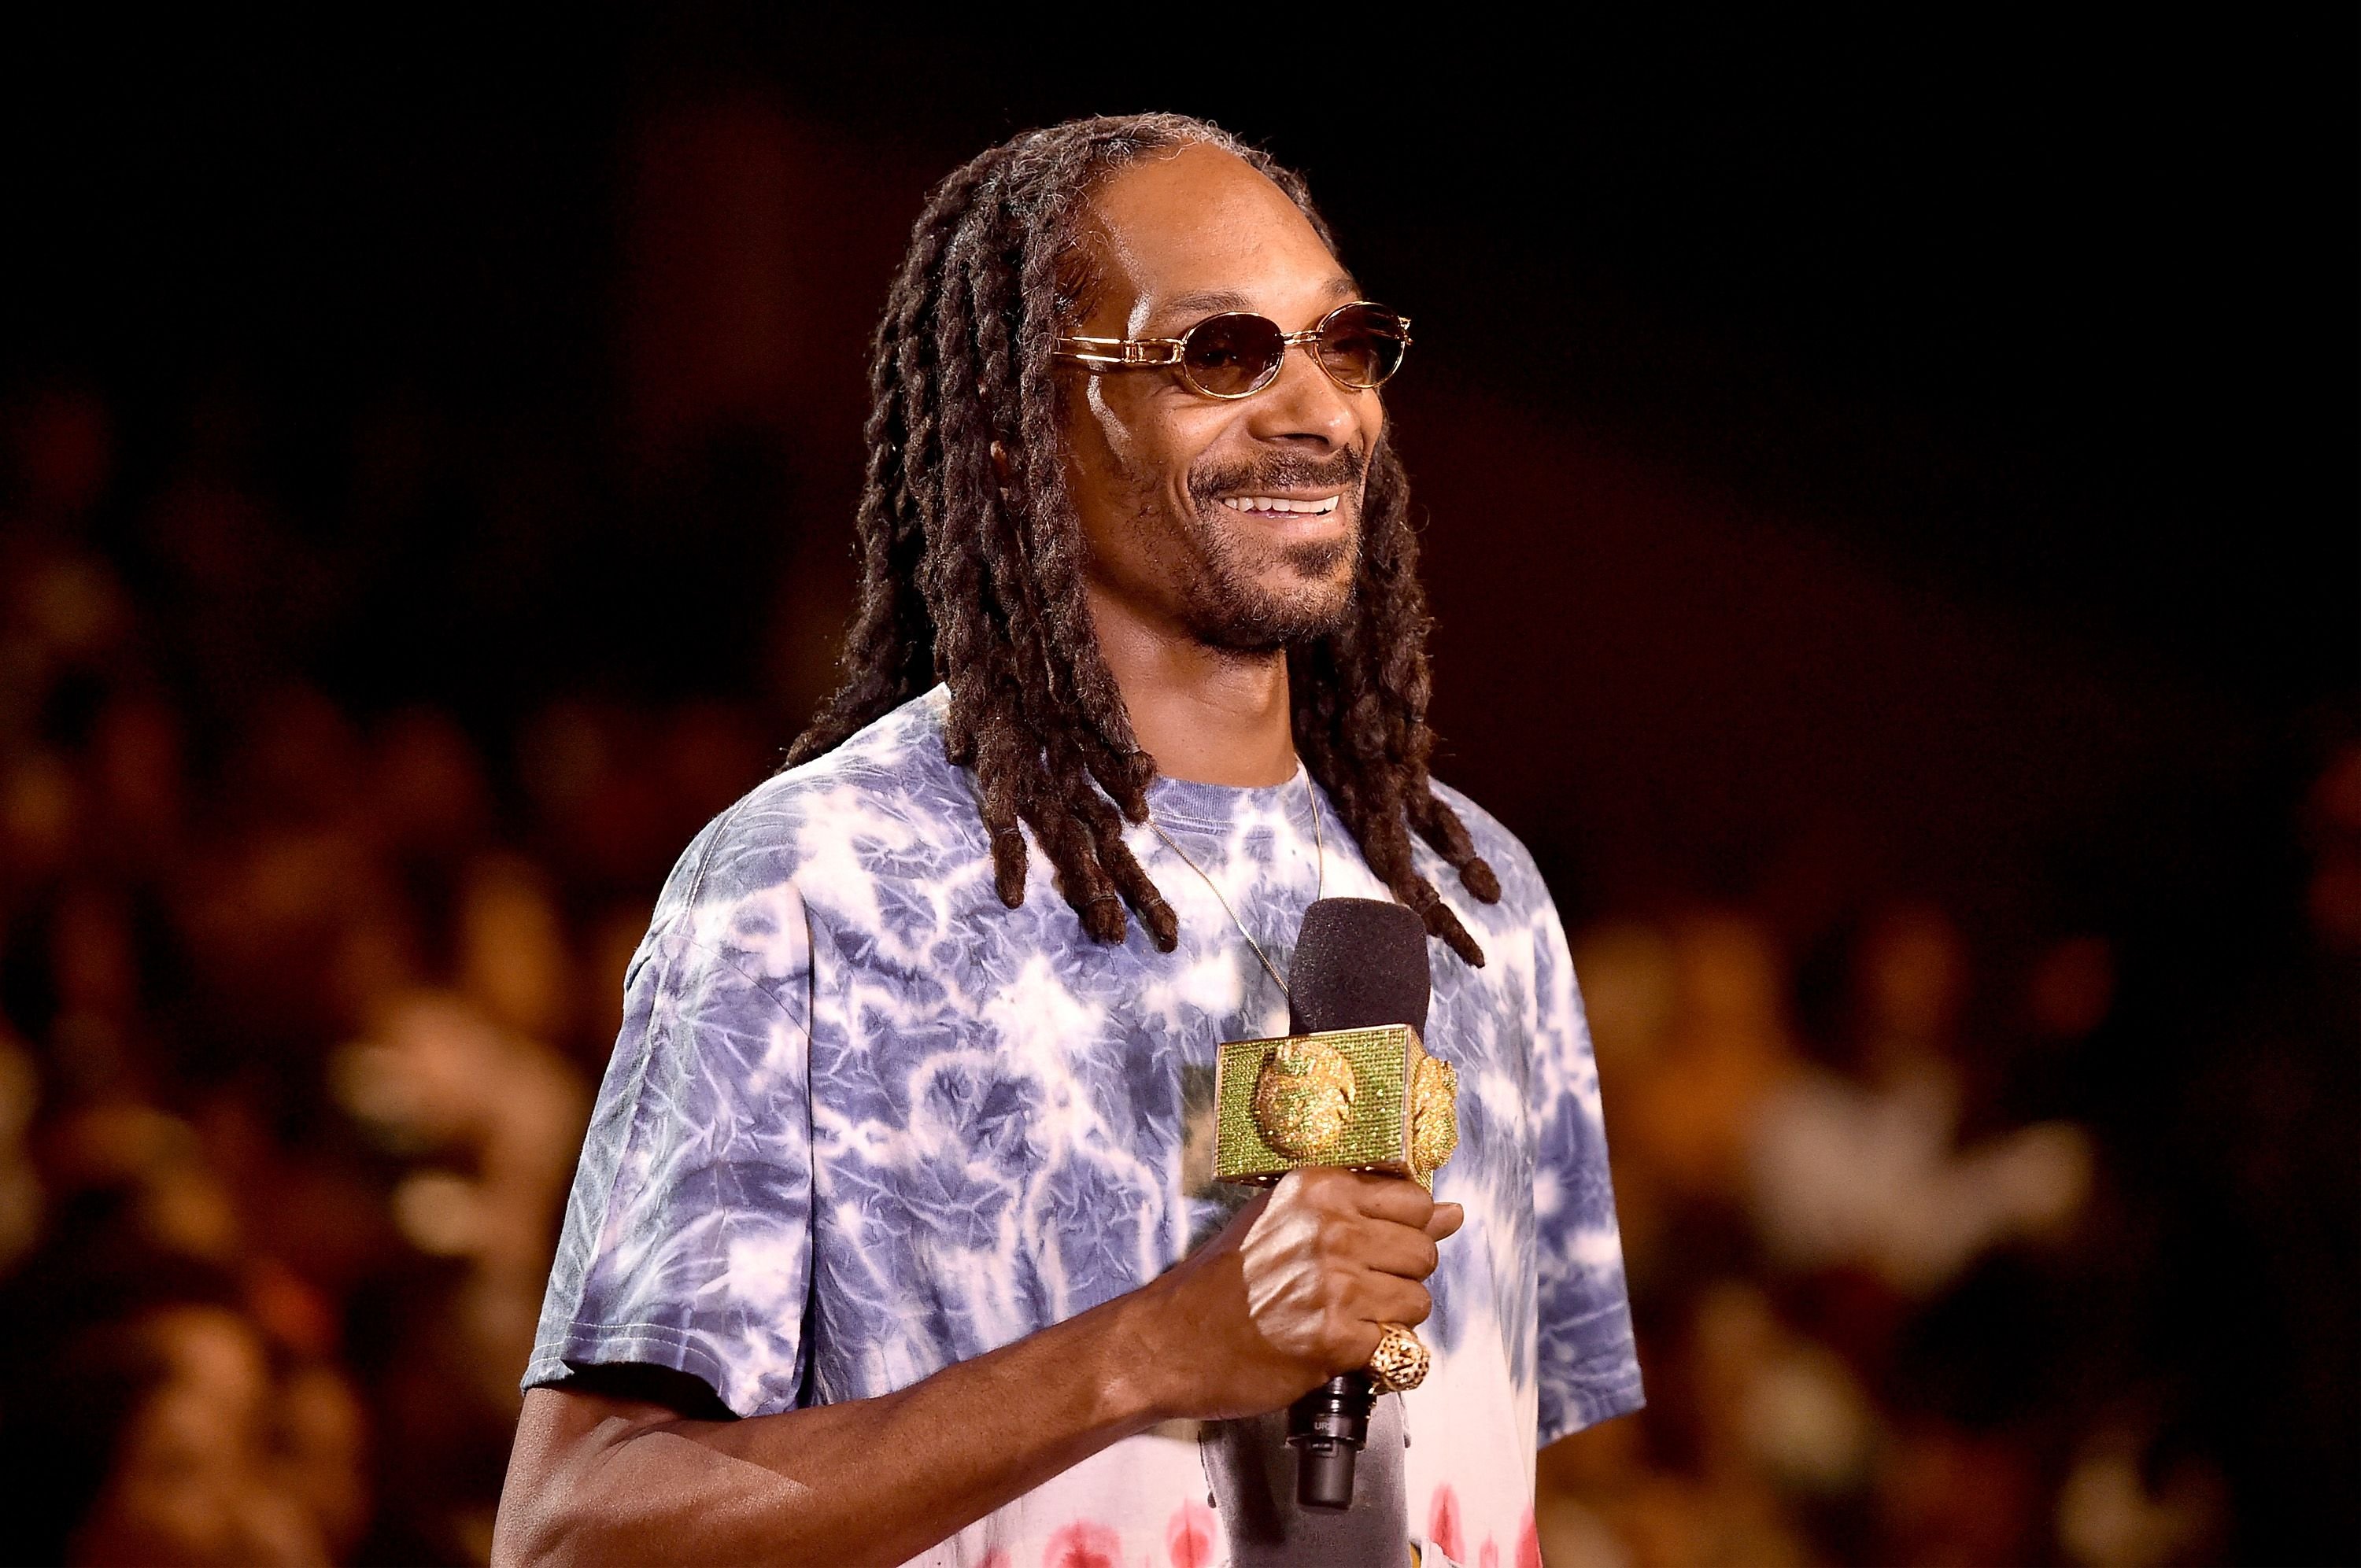 Iconic rapper Snoop Dogg attends the 2015 BET Hip Hop Awards at the Atlanta Civic Center in Atlanta, Georgia. | Photo: Getty Images